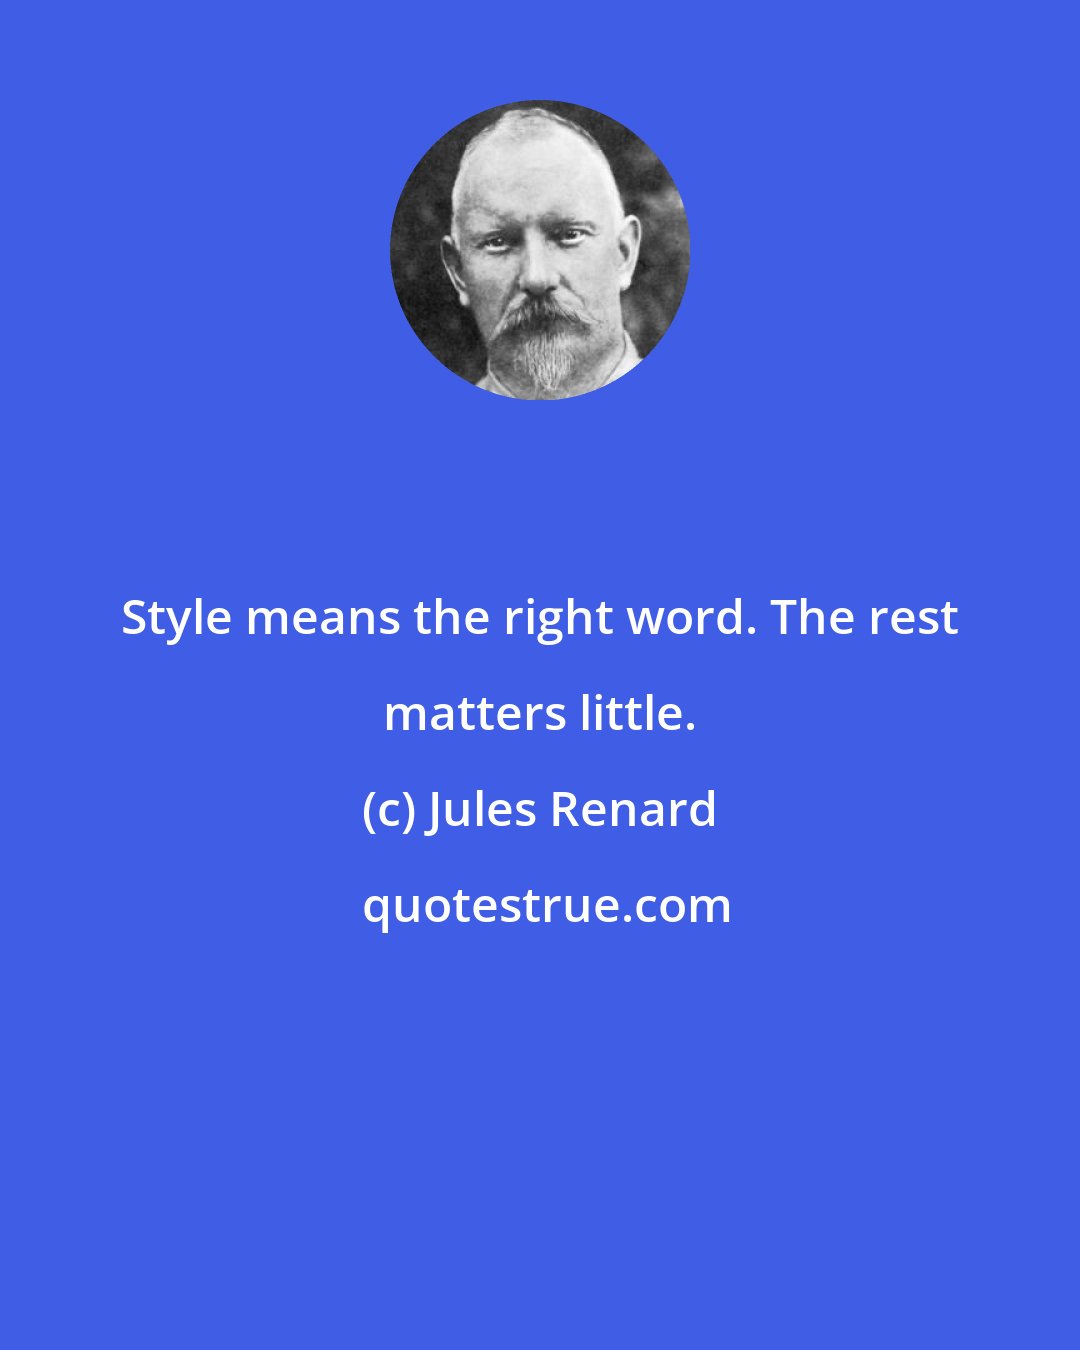 Jules Renard: Style means the right word. The rest matters little.